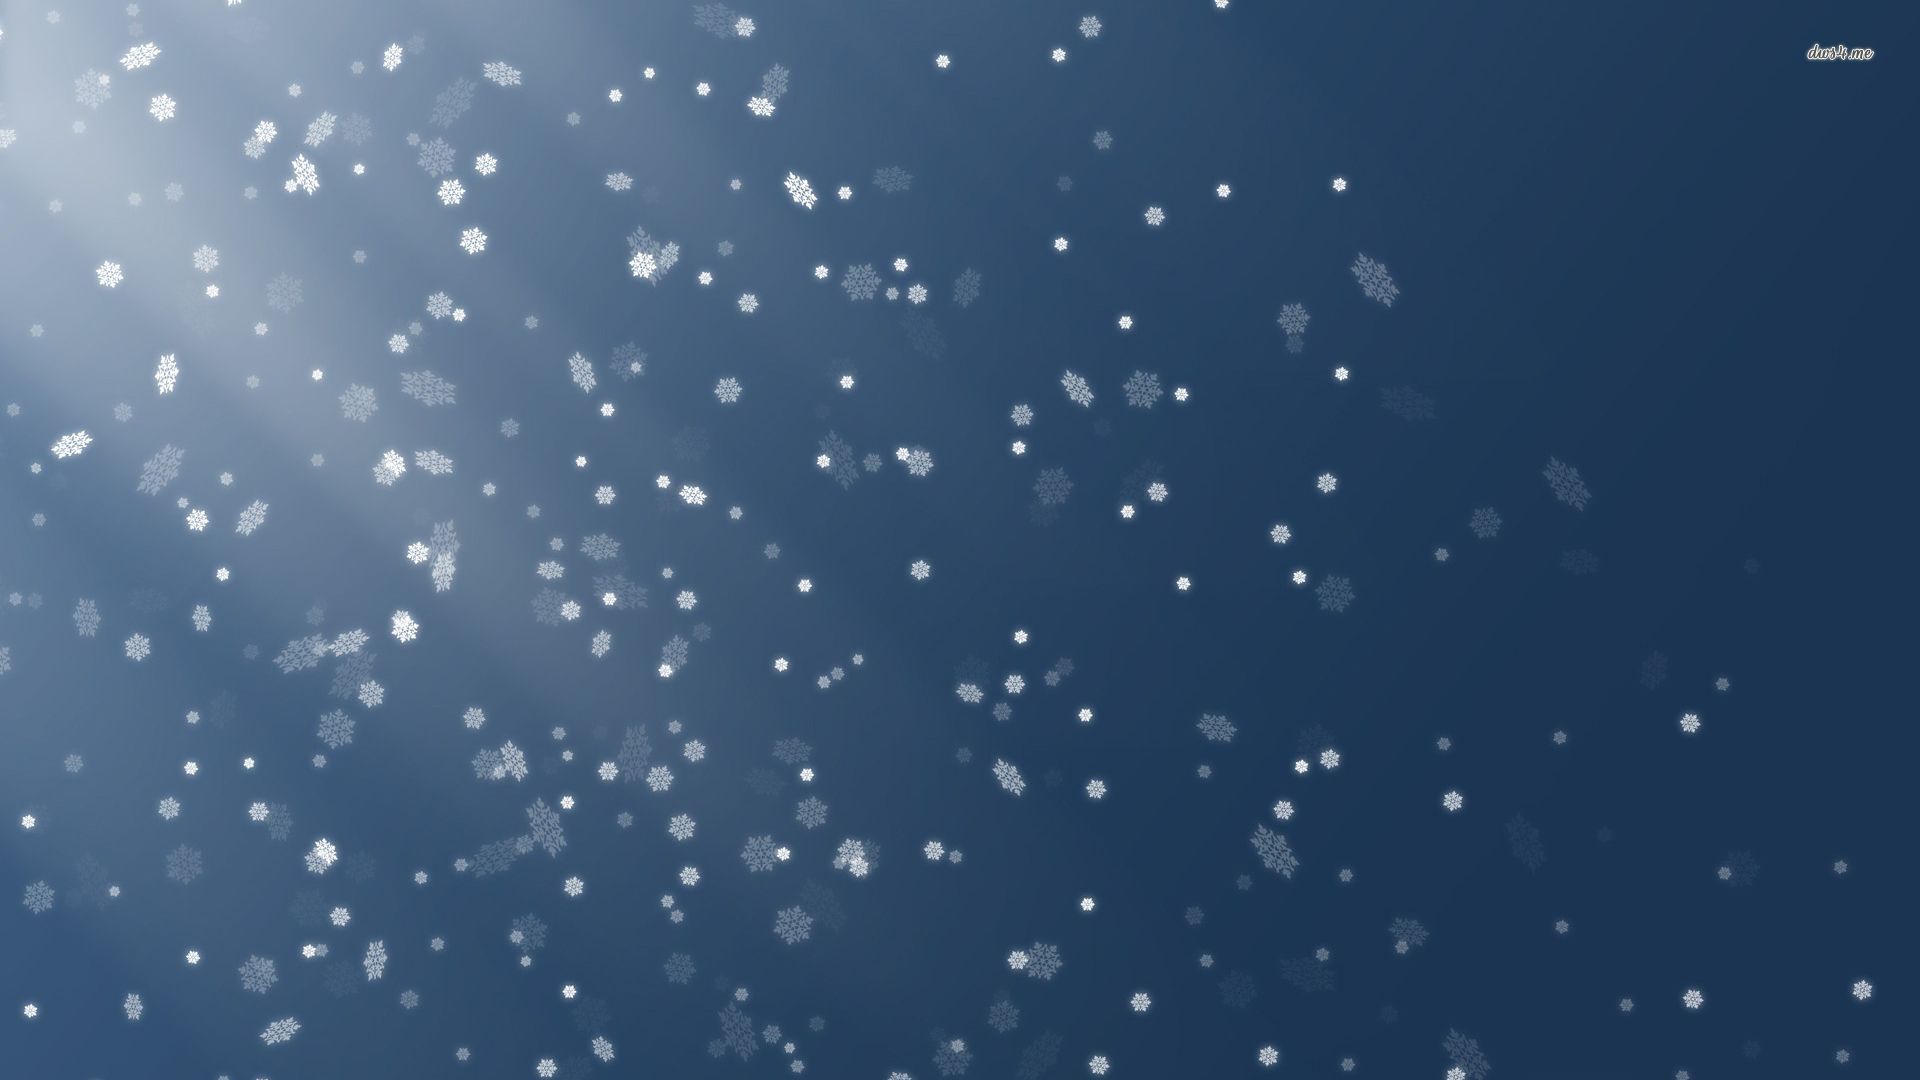 Ray of sun upon the snowflakes wallpaper - Digital Art wallpapers